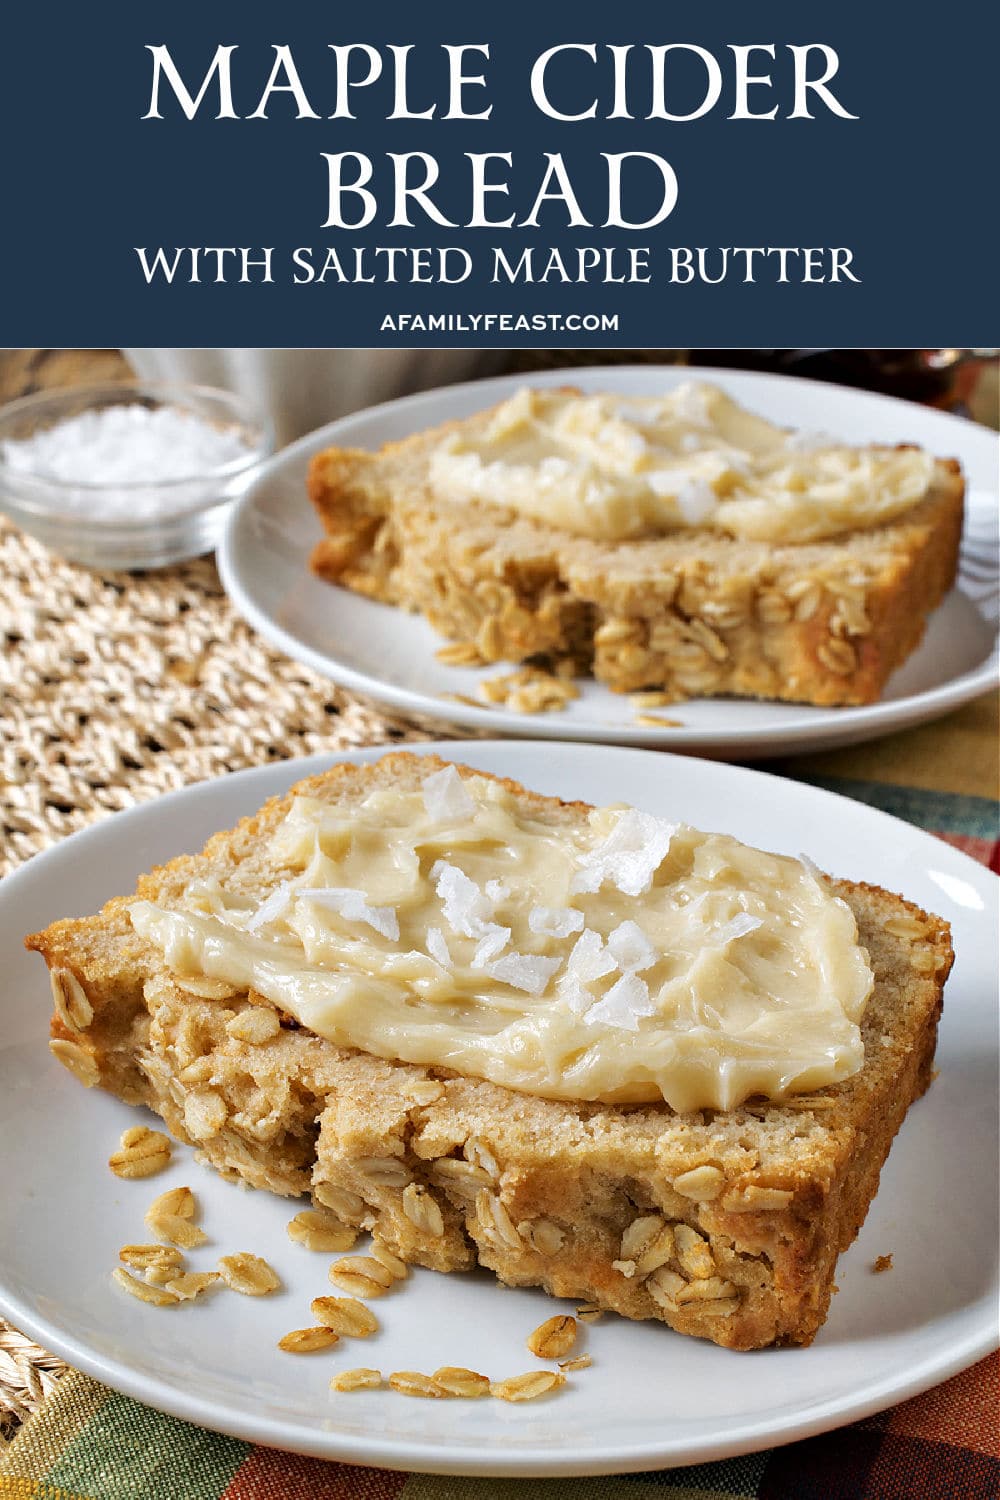 Maple Cider Bread with Salted Maple Butter